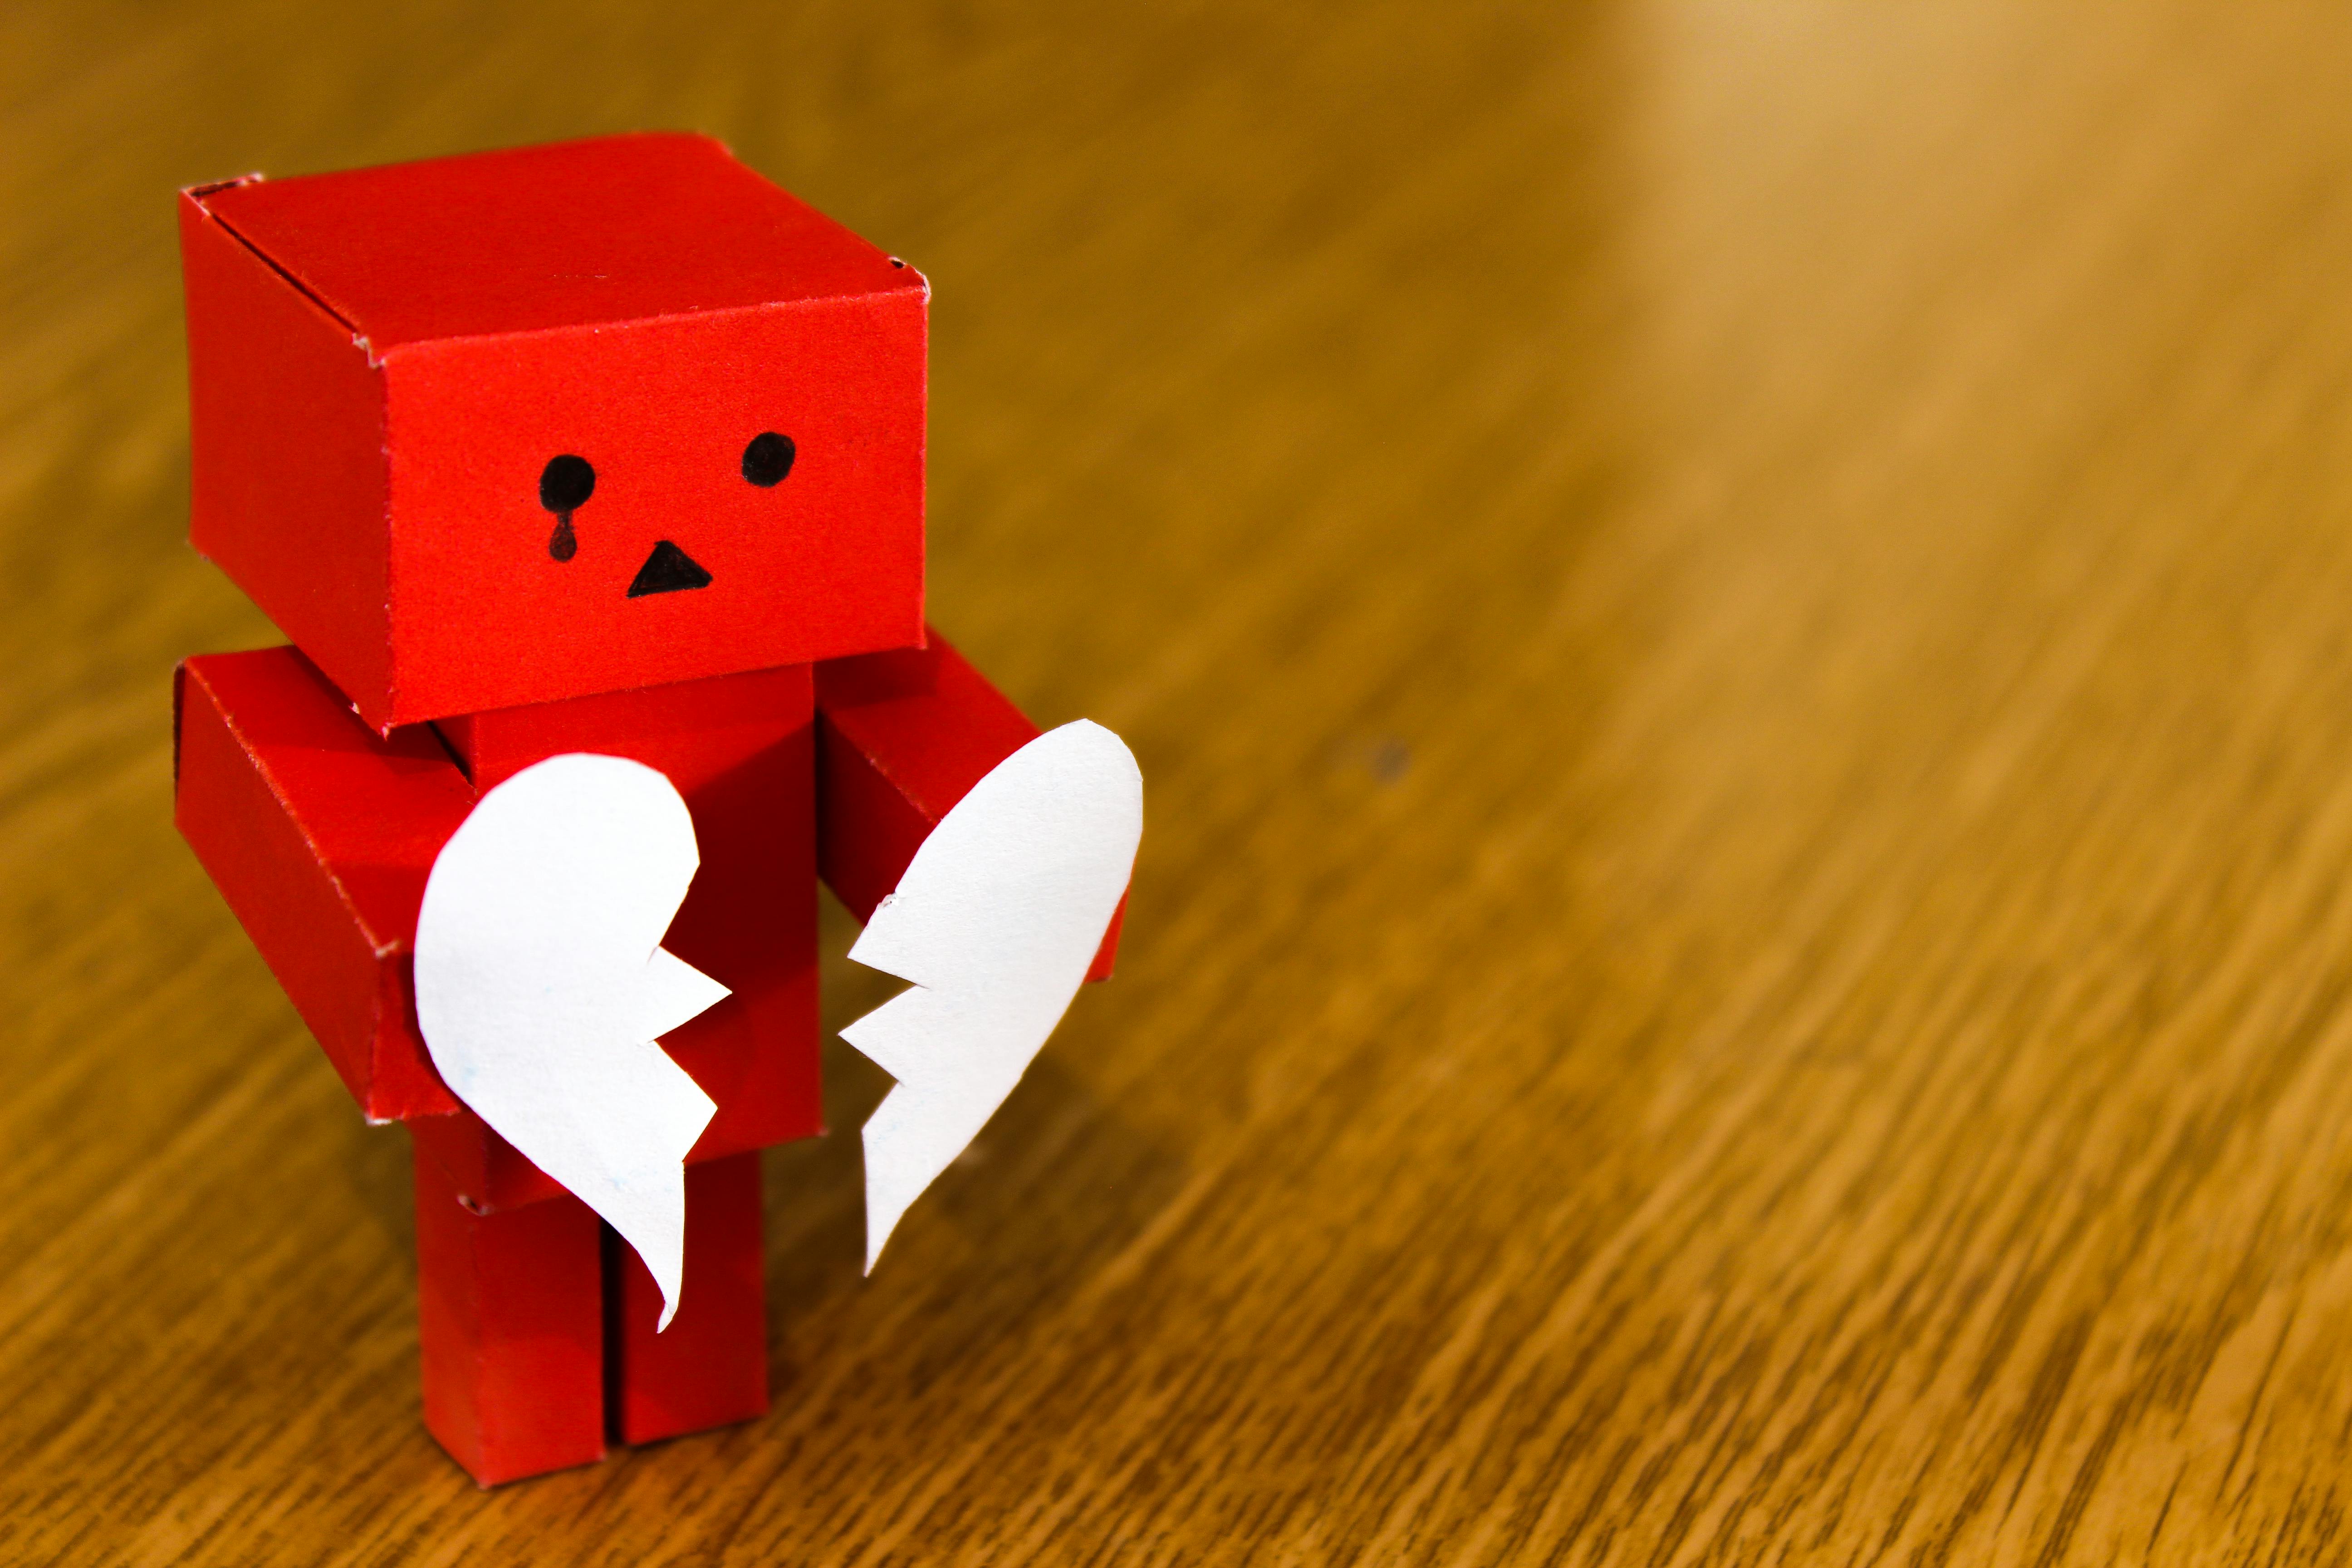 A red, paper-made robot is standing on a table, holding a torn, white paper heart, one piece per hand.